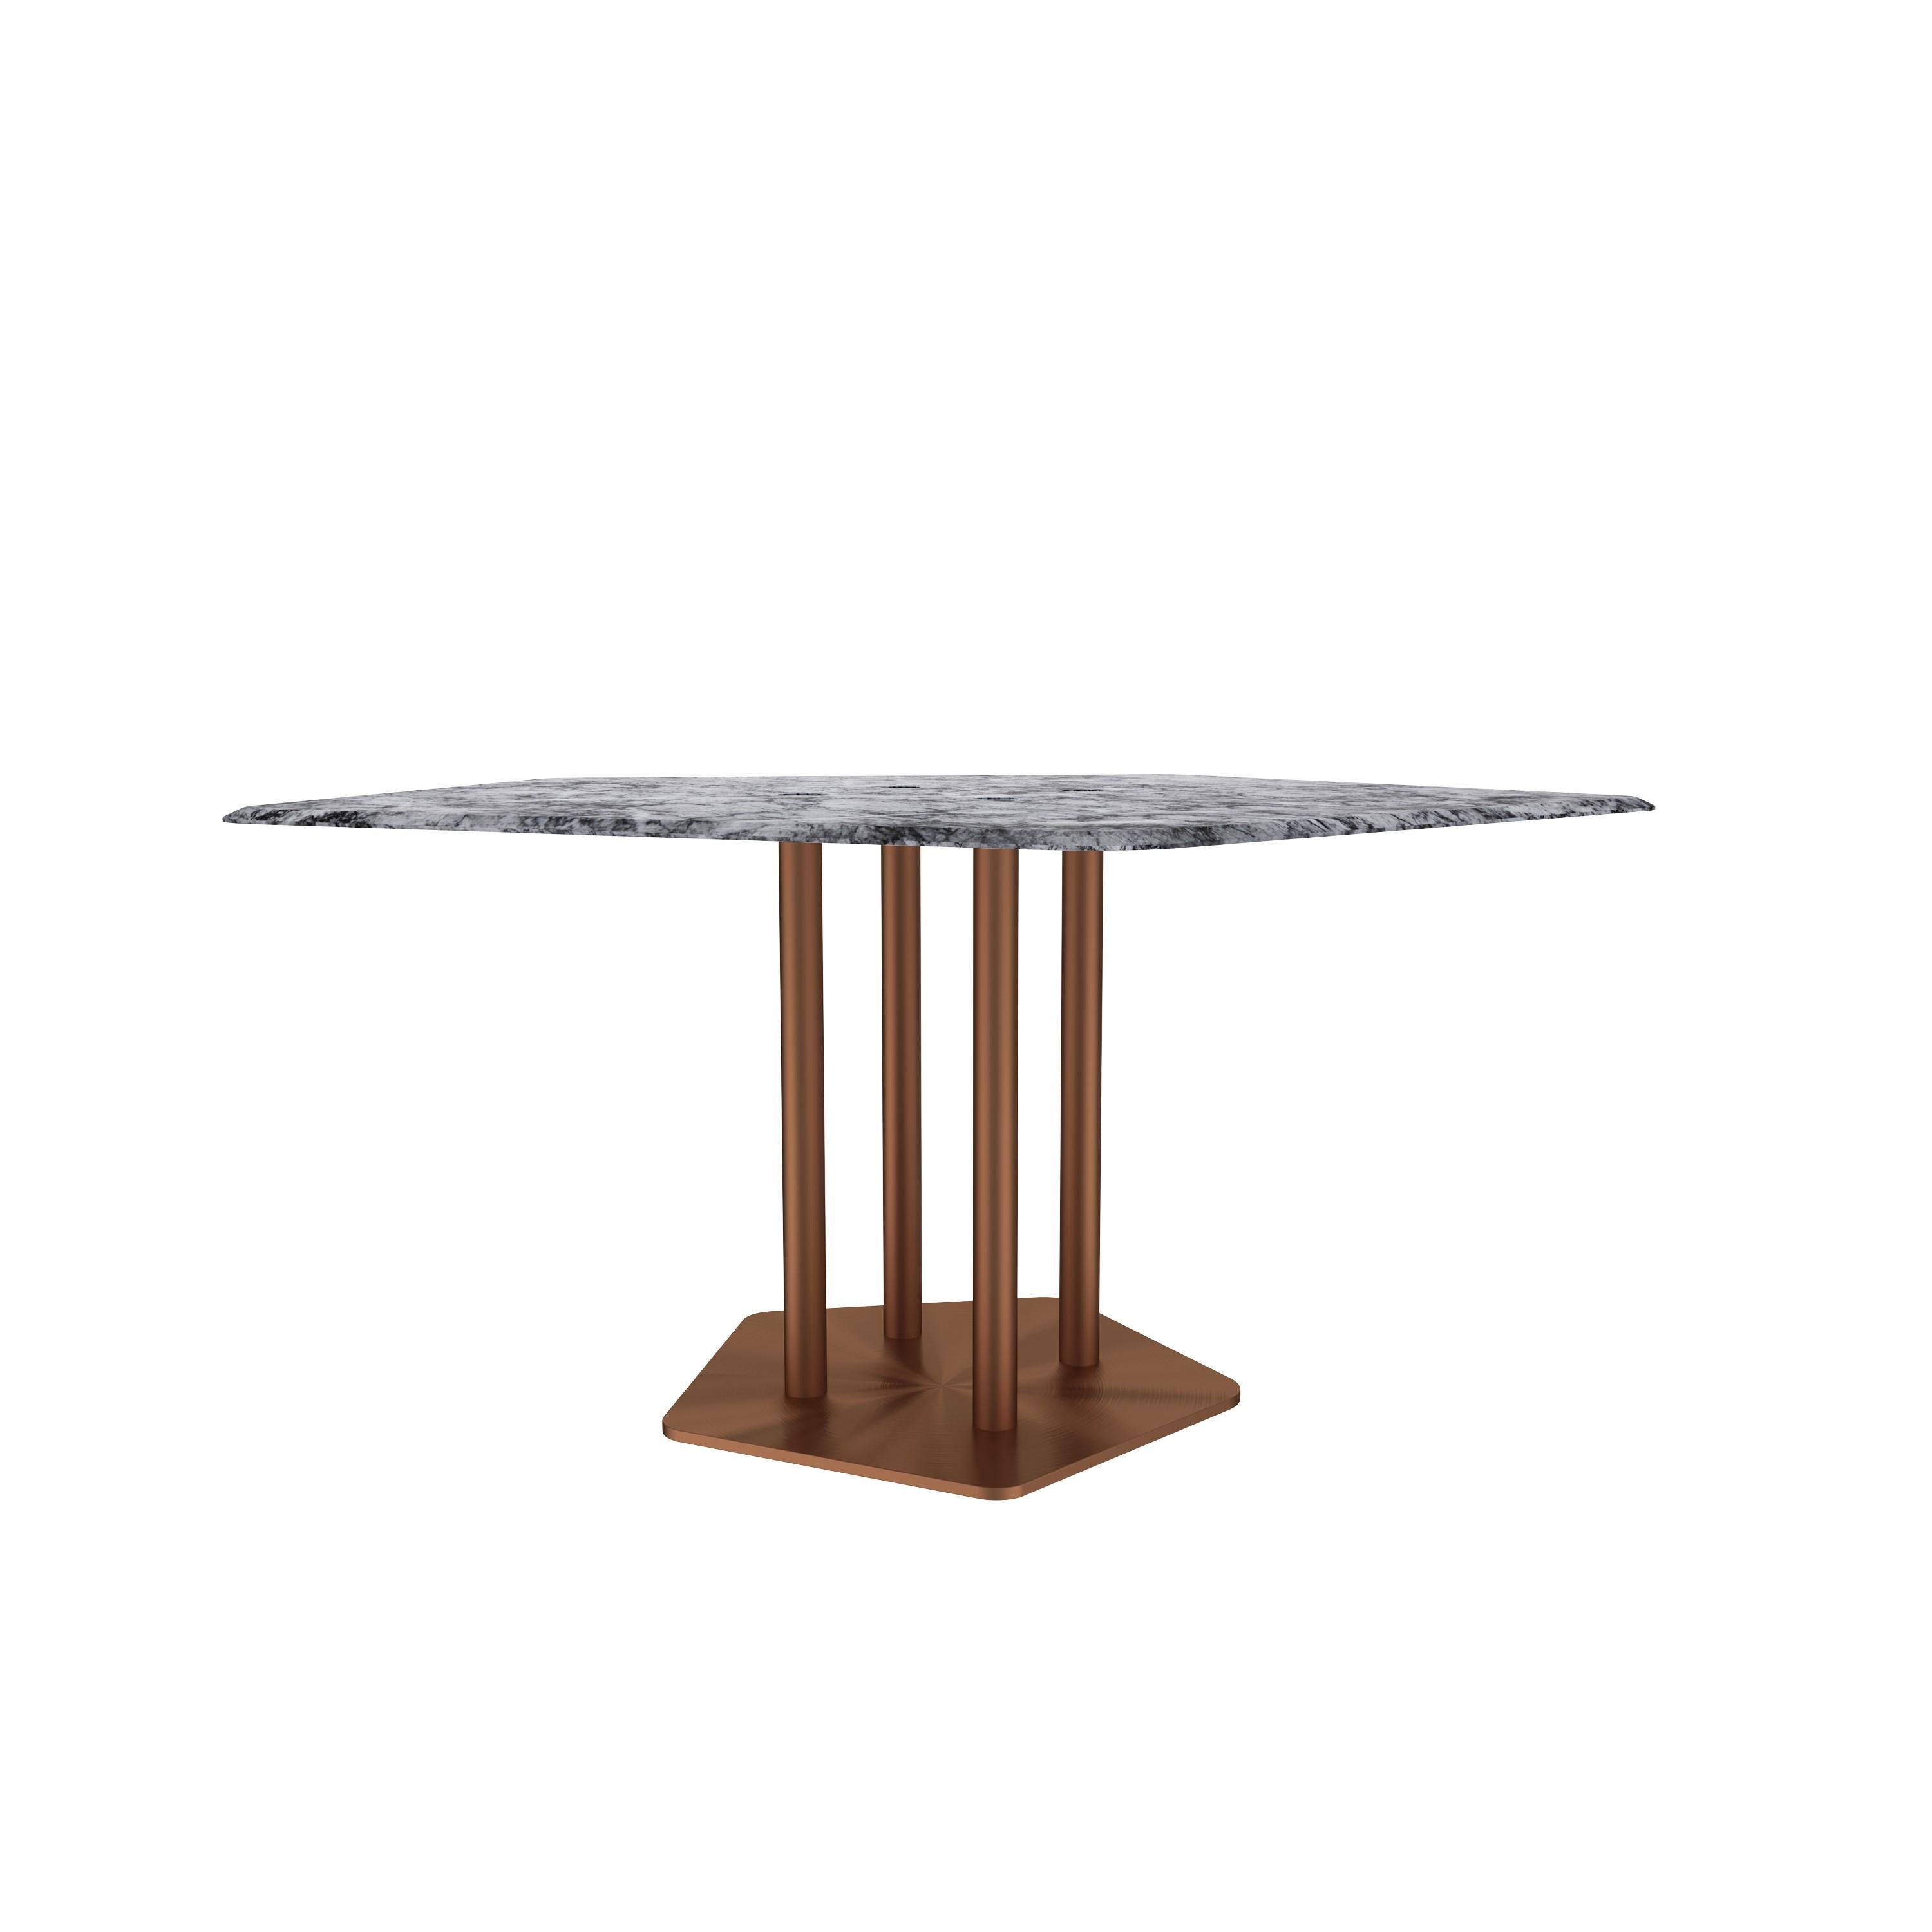 𝗣𝗿𝗼𝗱𝘂𝗰𝘁 𝗗𝗲𝘁𝗮𝗶𝗹𝘀:
Its center base built by a column of 4 pillars creates a unique contrast with the 5 points of this dining table. The pentagonal shape emu- lates the Sun; the closest biggest star above us and that also enriches our